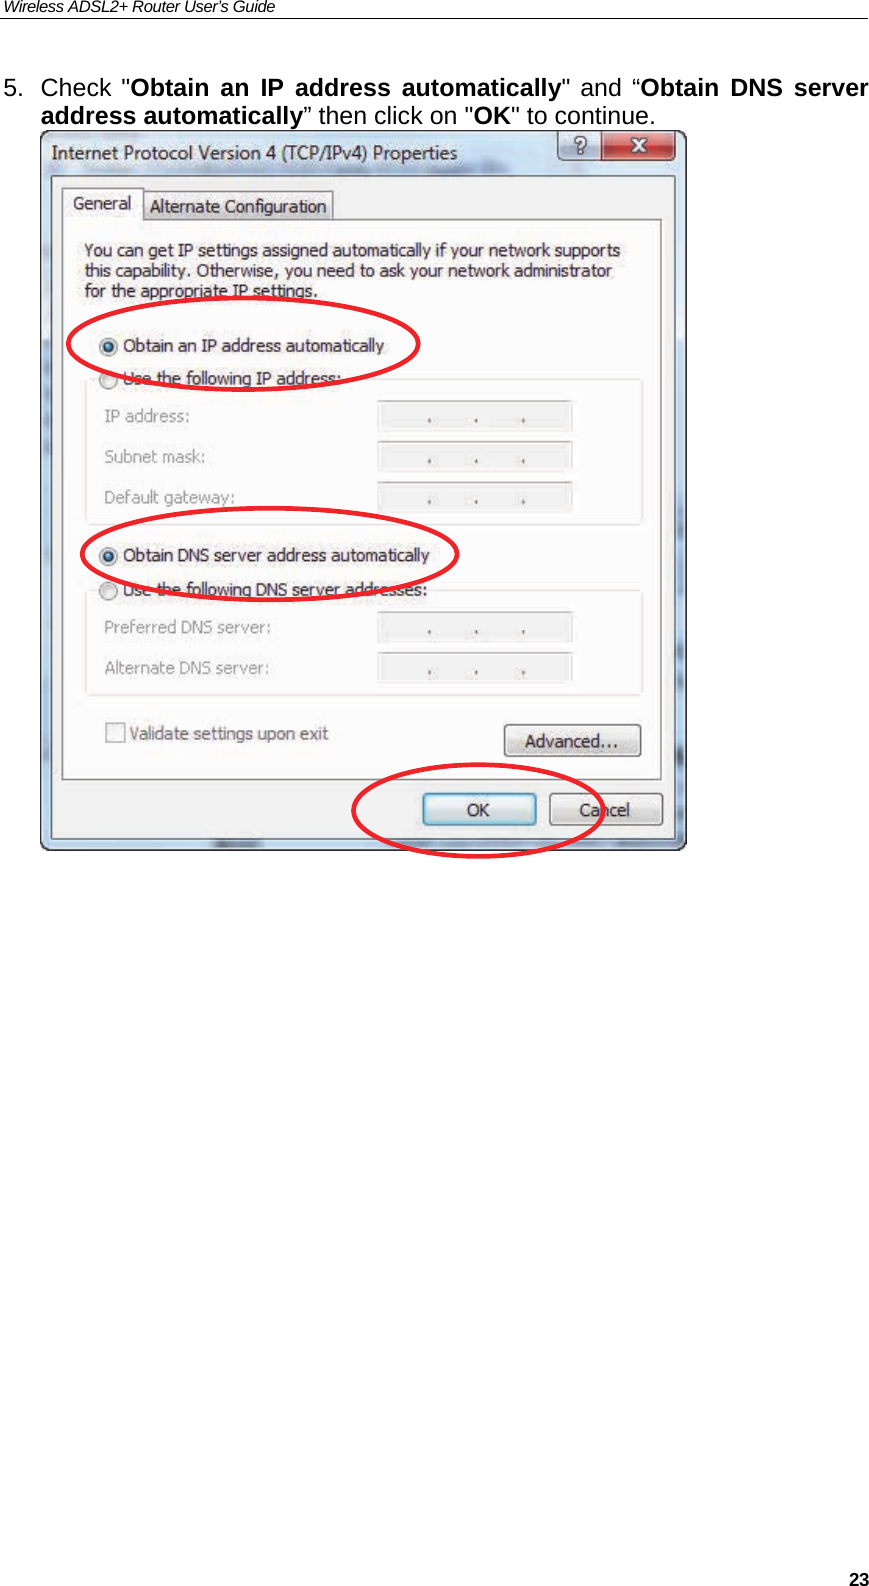 Wireless ADSL2+ Router User’s Guide     235. Check &quot;Obtain an IP address automatically&quot; and “Obtain DNS server address automatically” then click on &quot;OK&quot; to continue.                     